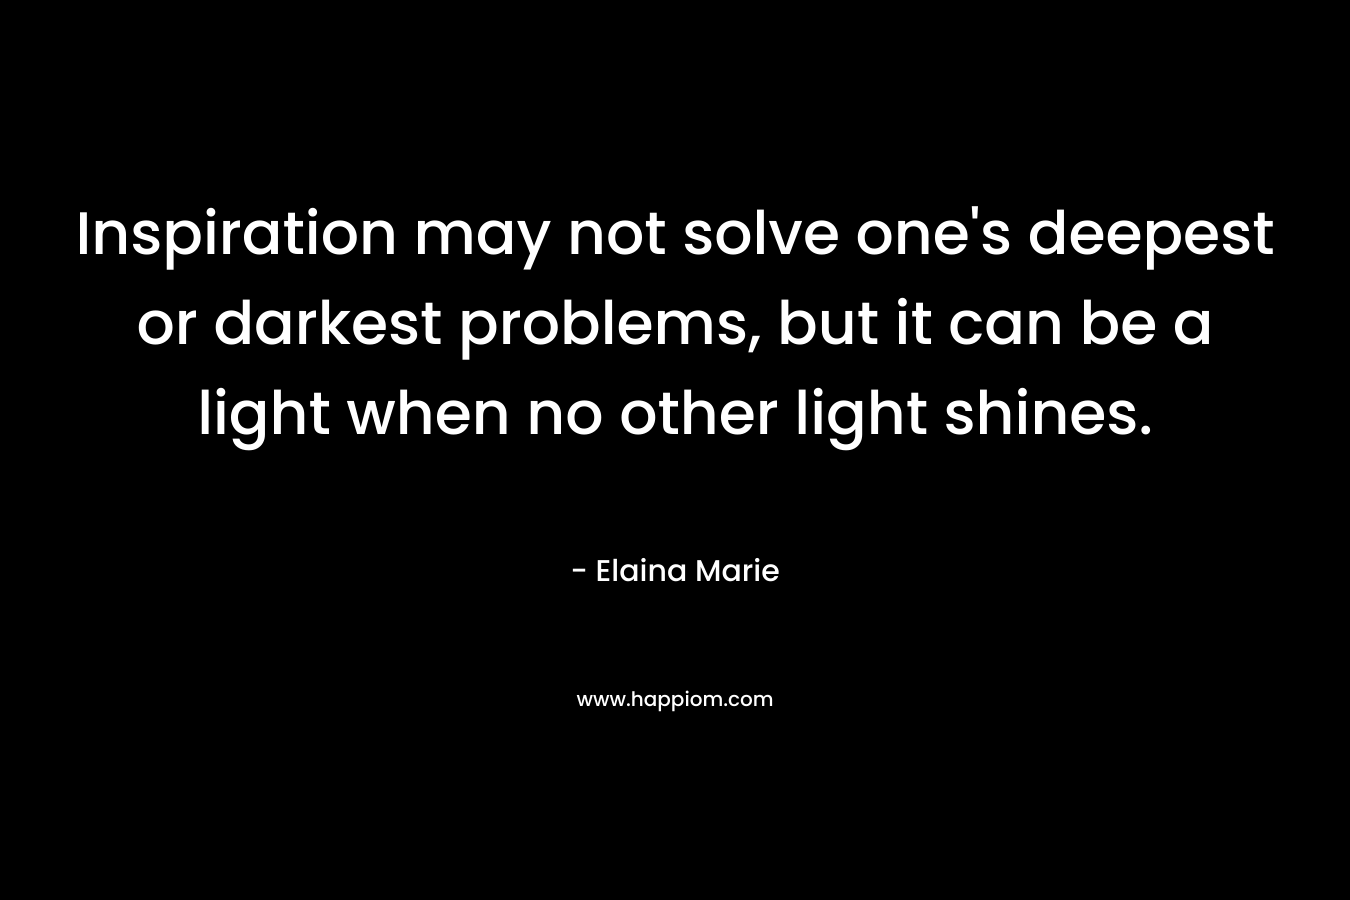 Inspiration may not solve one’s deepest or darkest problems, but it can be a light when no other light shines. – Elaina Marie